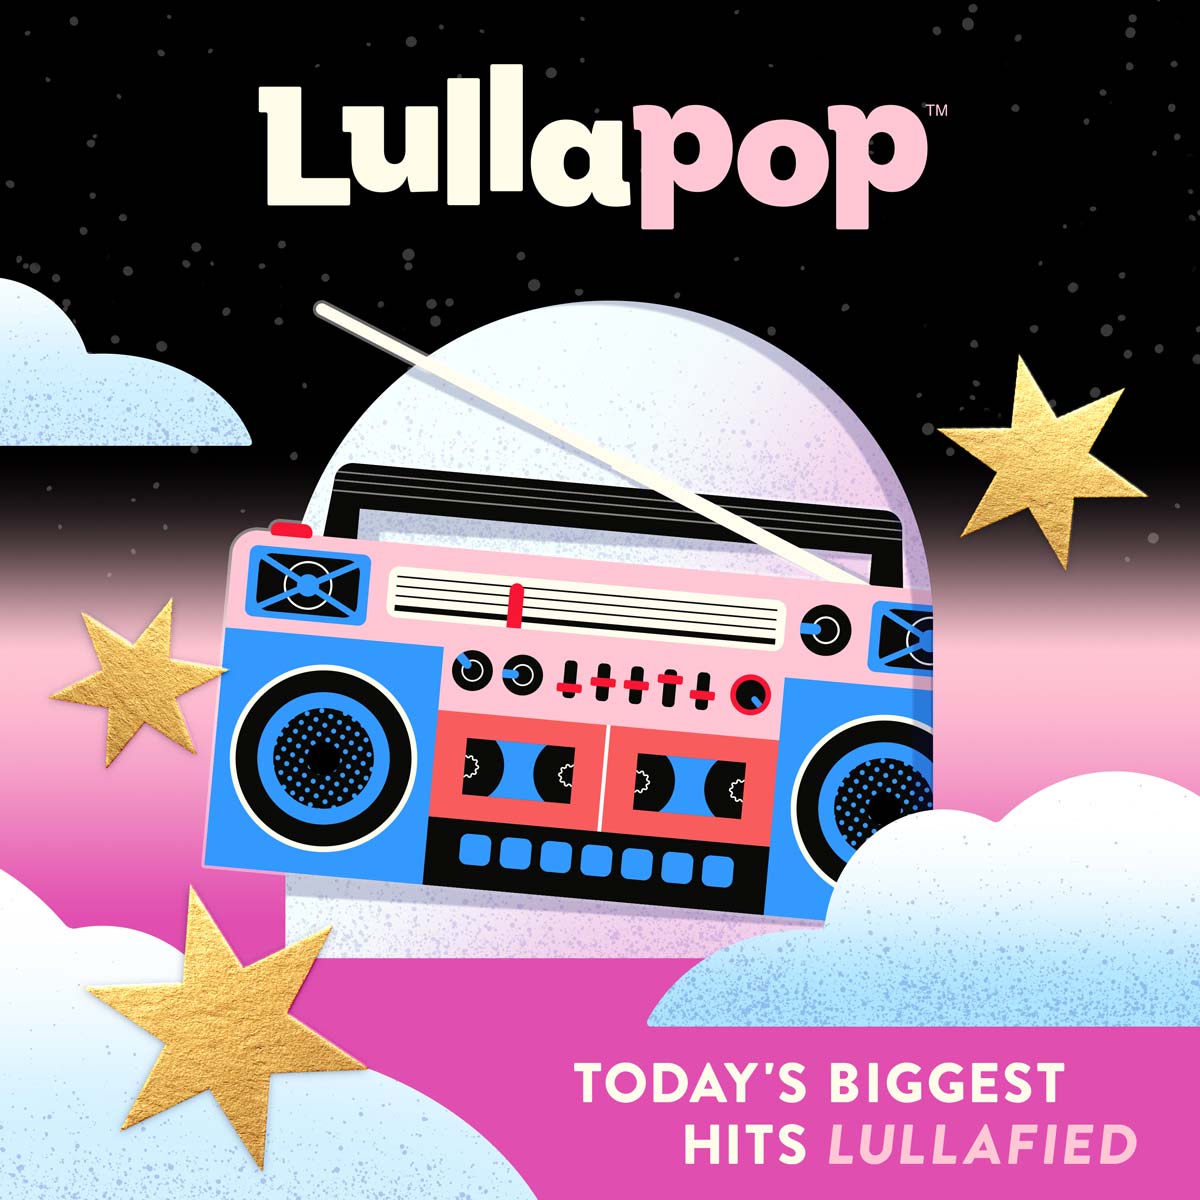 Featured image for “Lullapop”